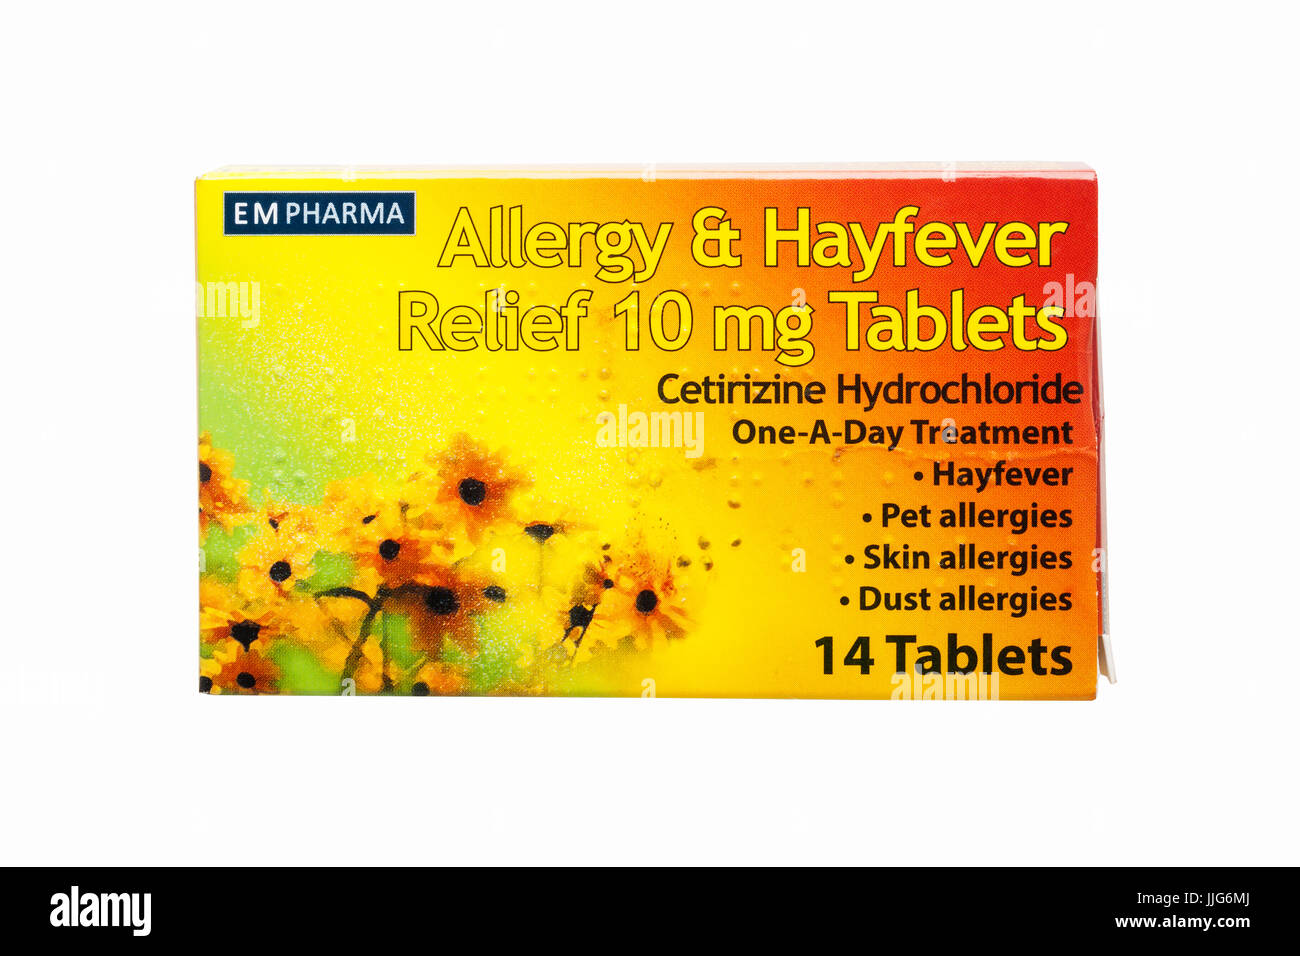 A packet of Empharma allergy & hayfever relief tablets on a white background Stock Photo